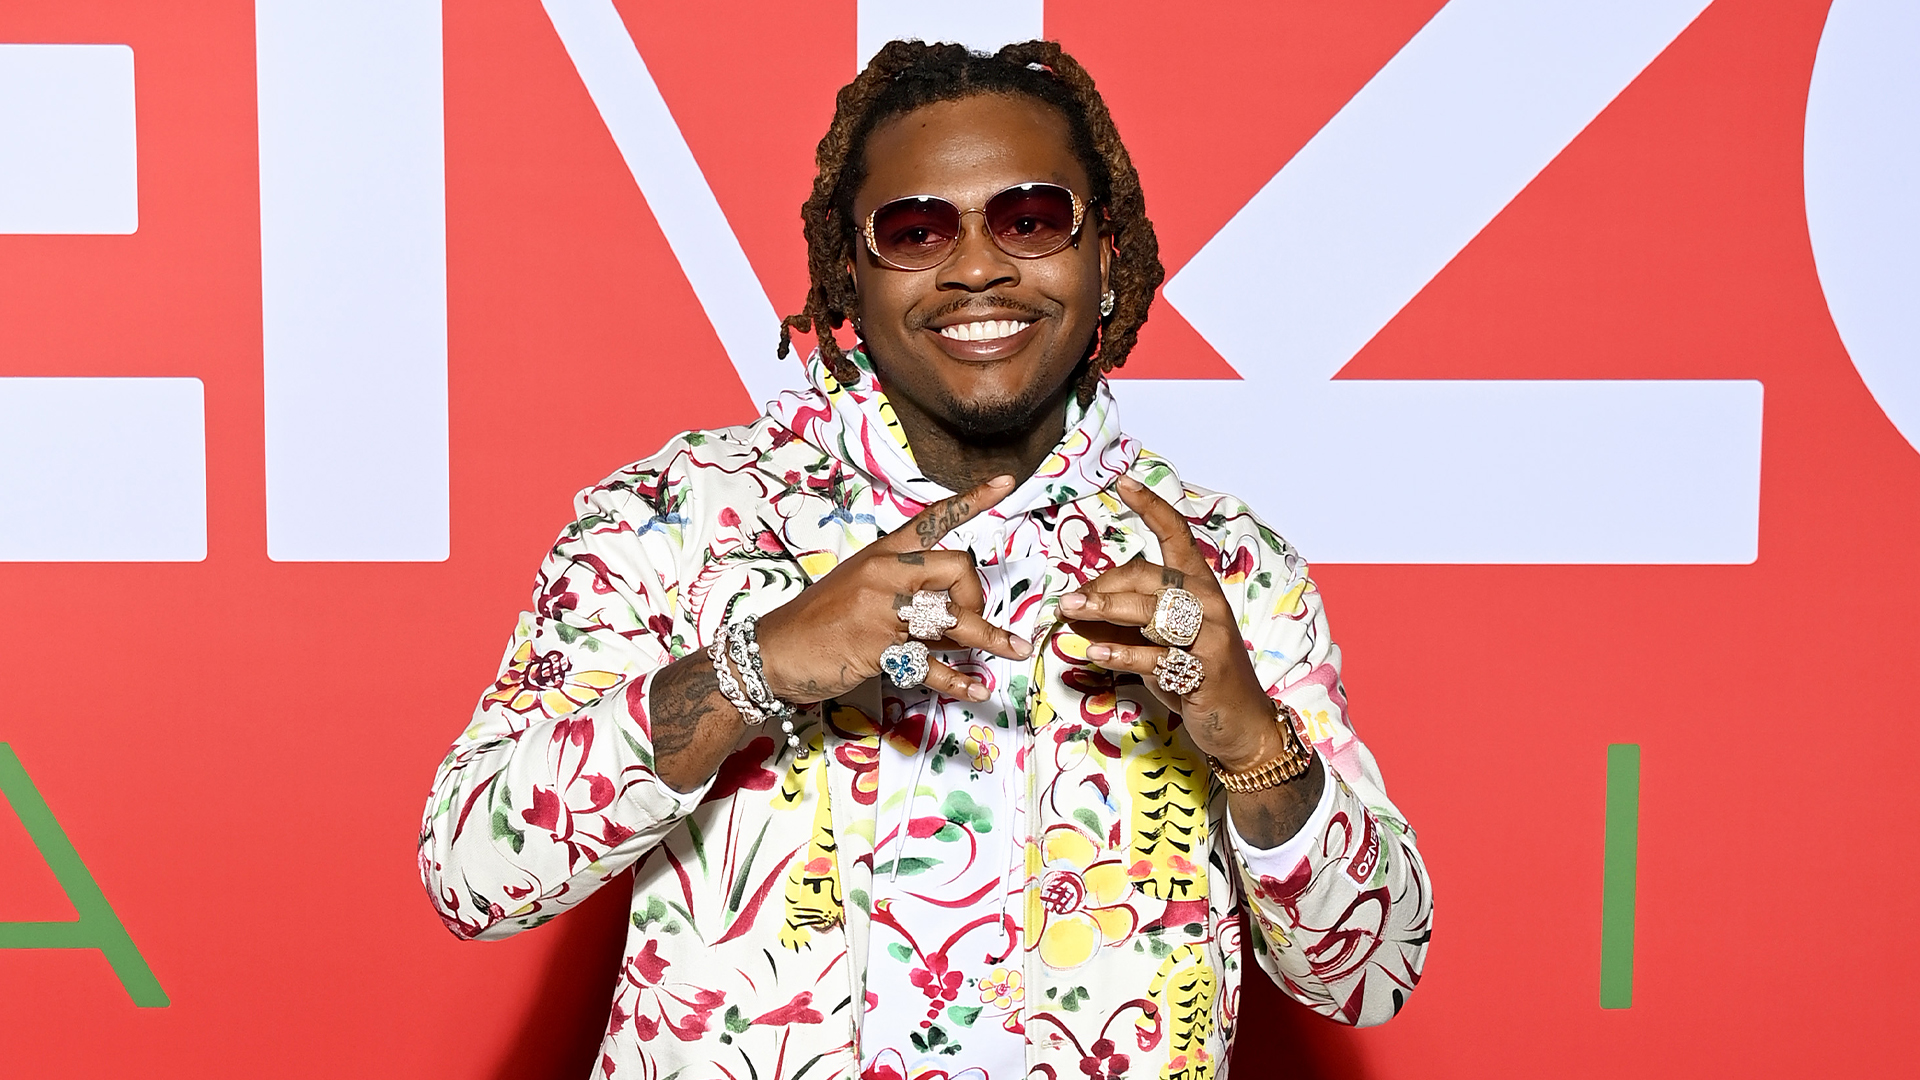 Gunna Talks Heading Into The Metaverse And His $300K NFT Purchase — 'The Future Is Coming'